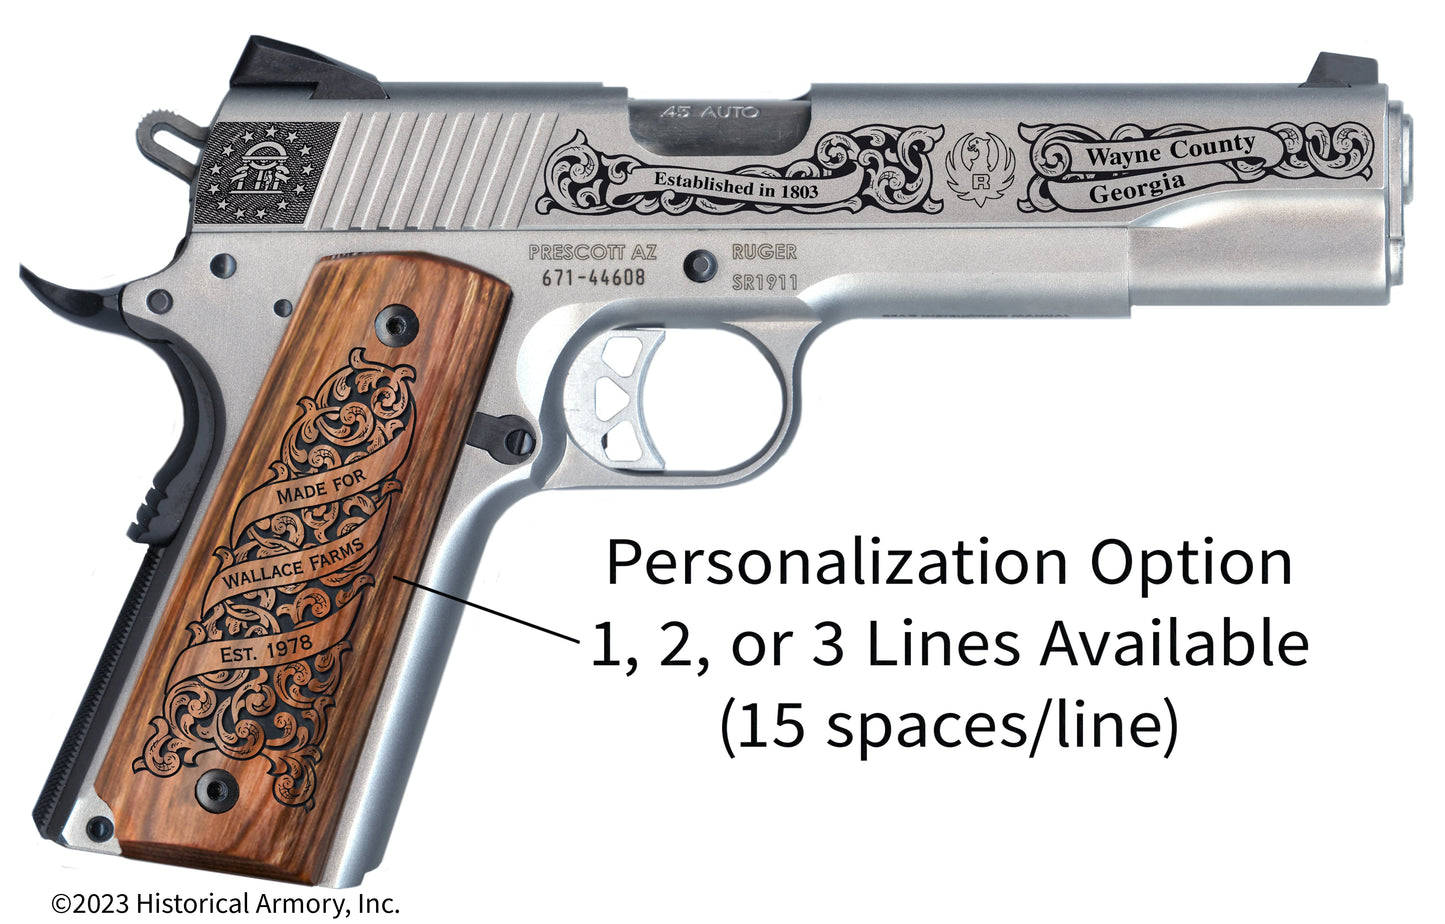 Wayne County Georgia Personalized Engraved .45 Auto Ruger 1911